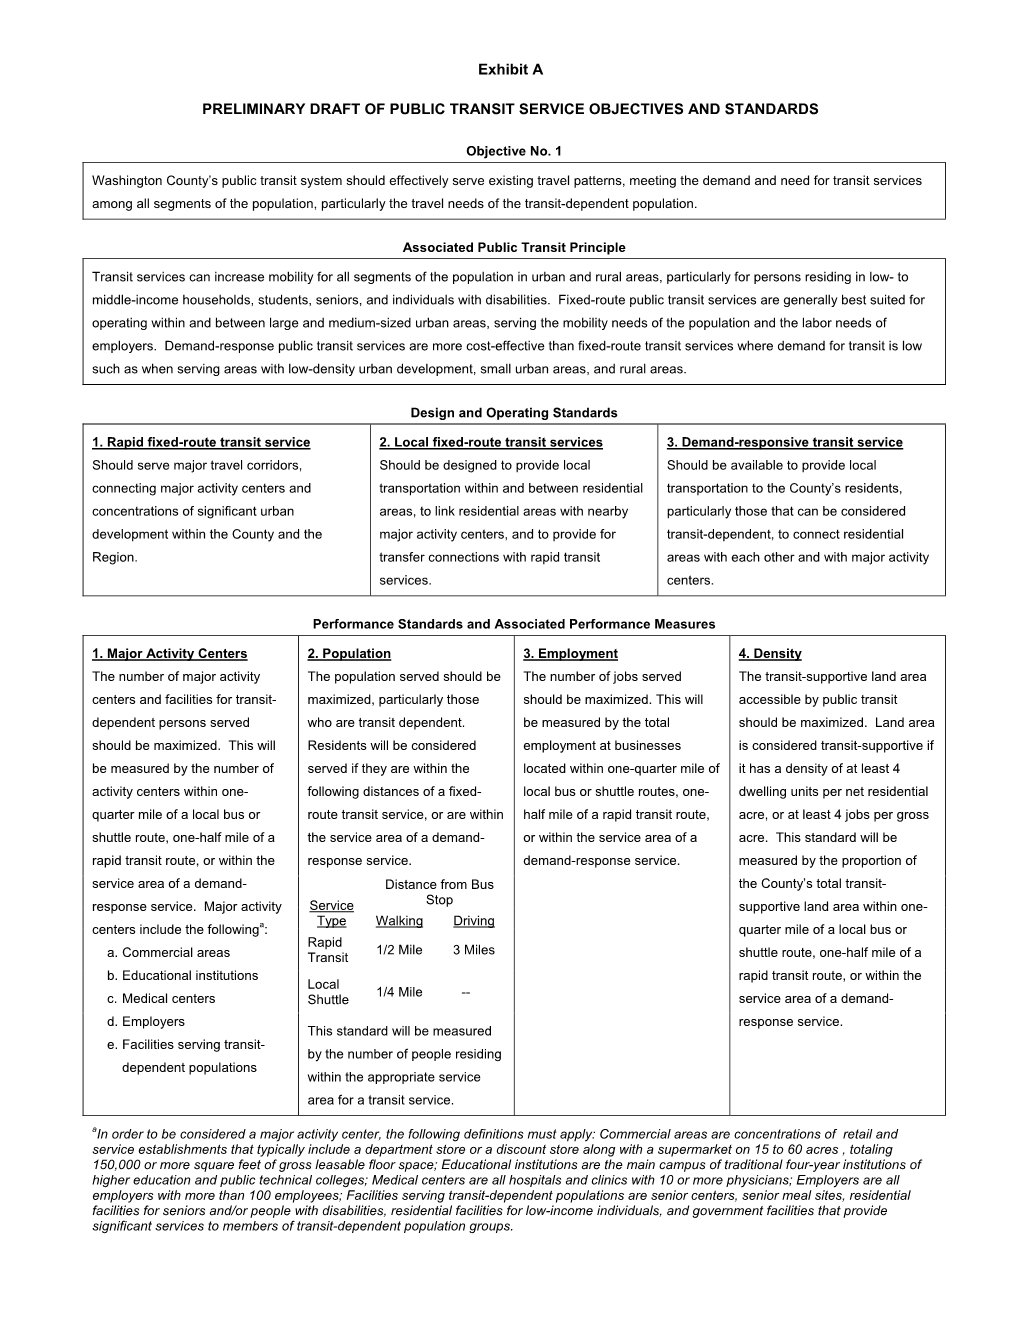 Preliminary Draft Service Objectives, Principles, and Standards